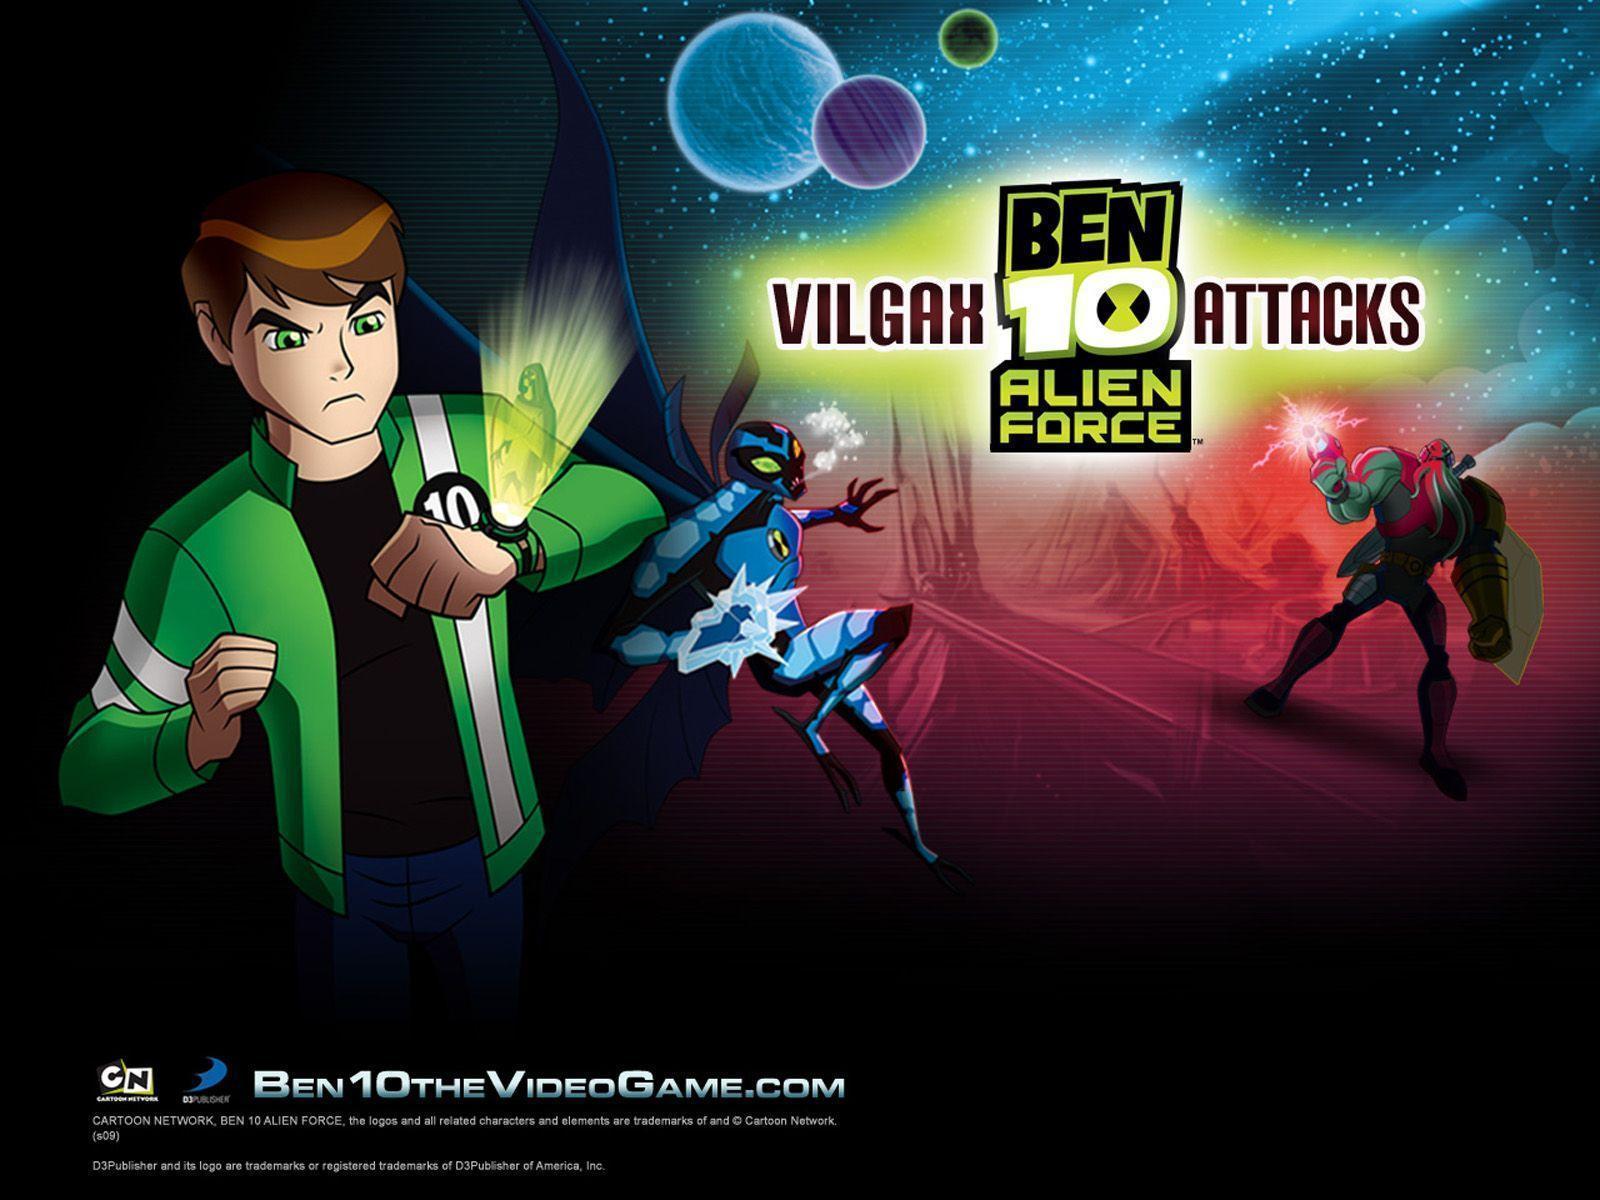 Ben 10 Background Image & Wallpaper. Play Free Games for Girls